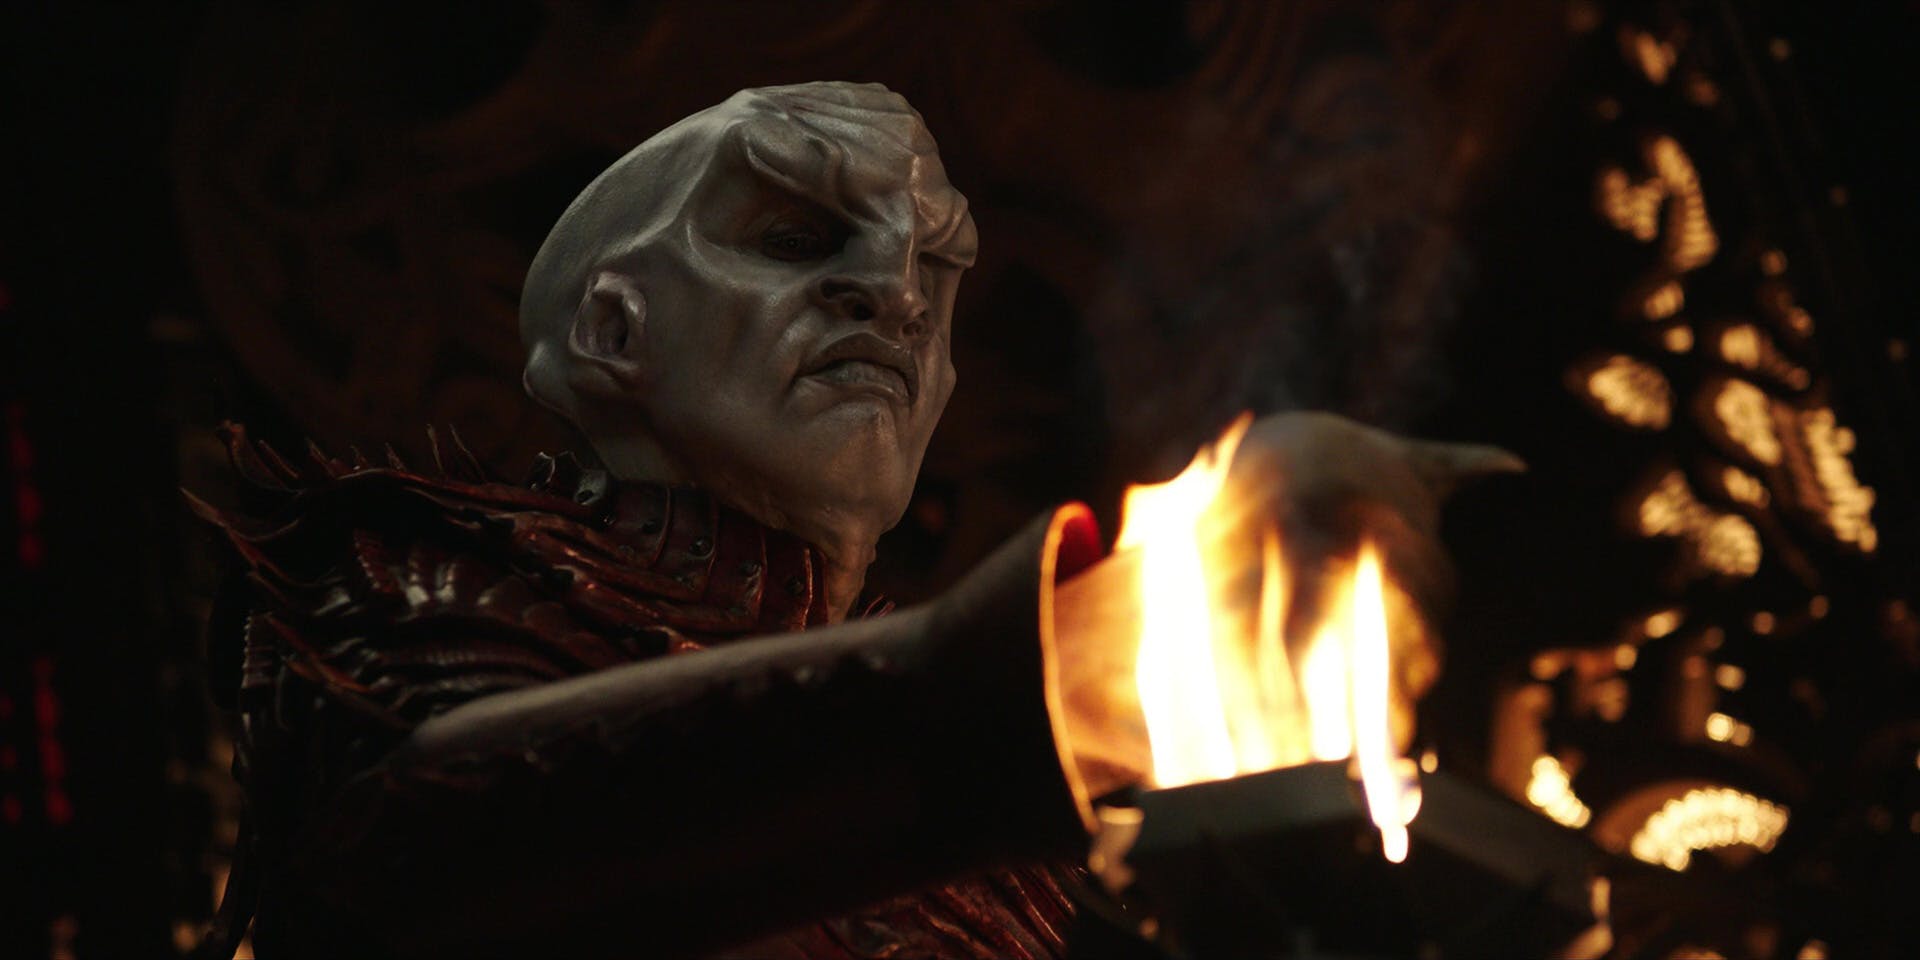 Voq assures T'Kuvma of his faith by placing his hand over an open flame and holding it there in 'The Vulcan Hello'